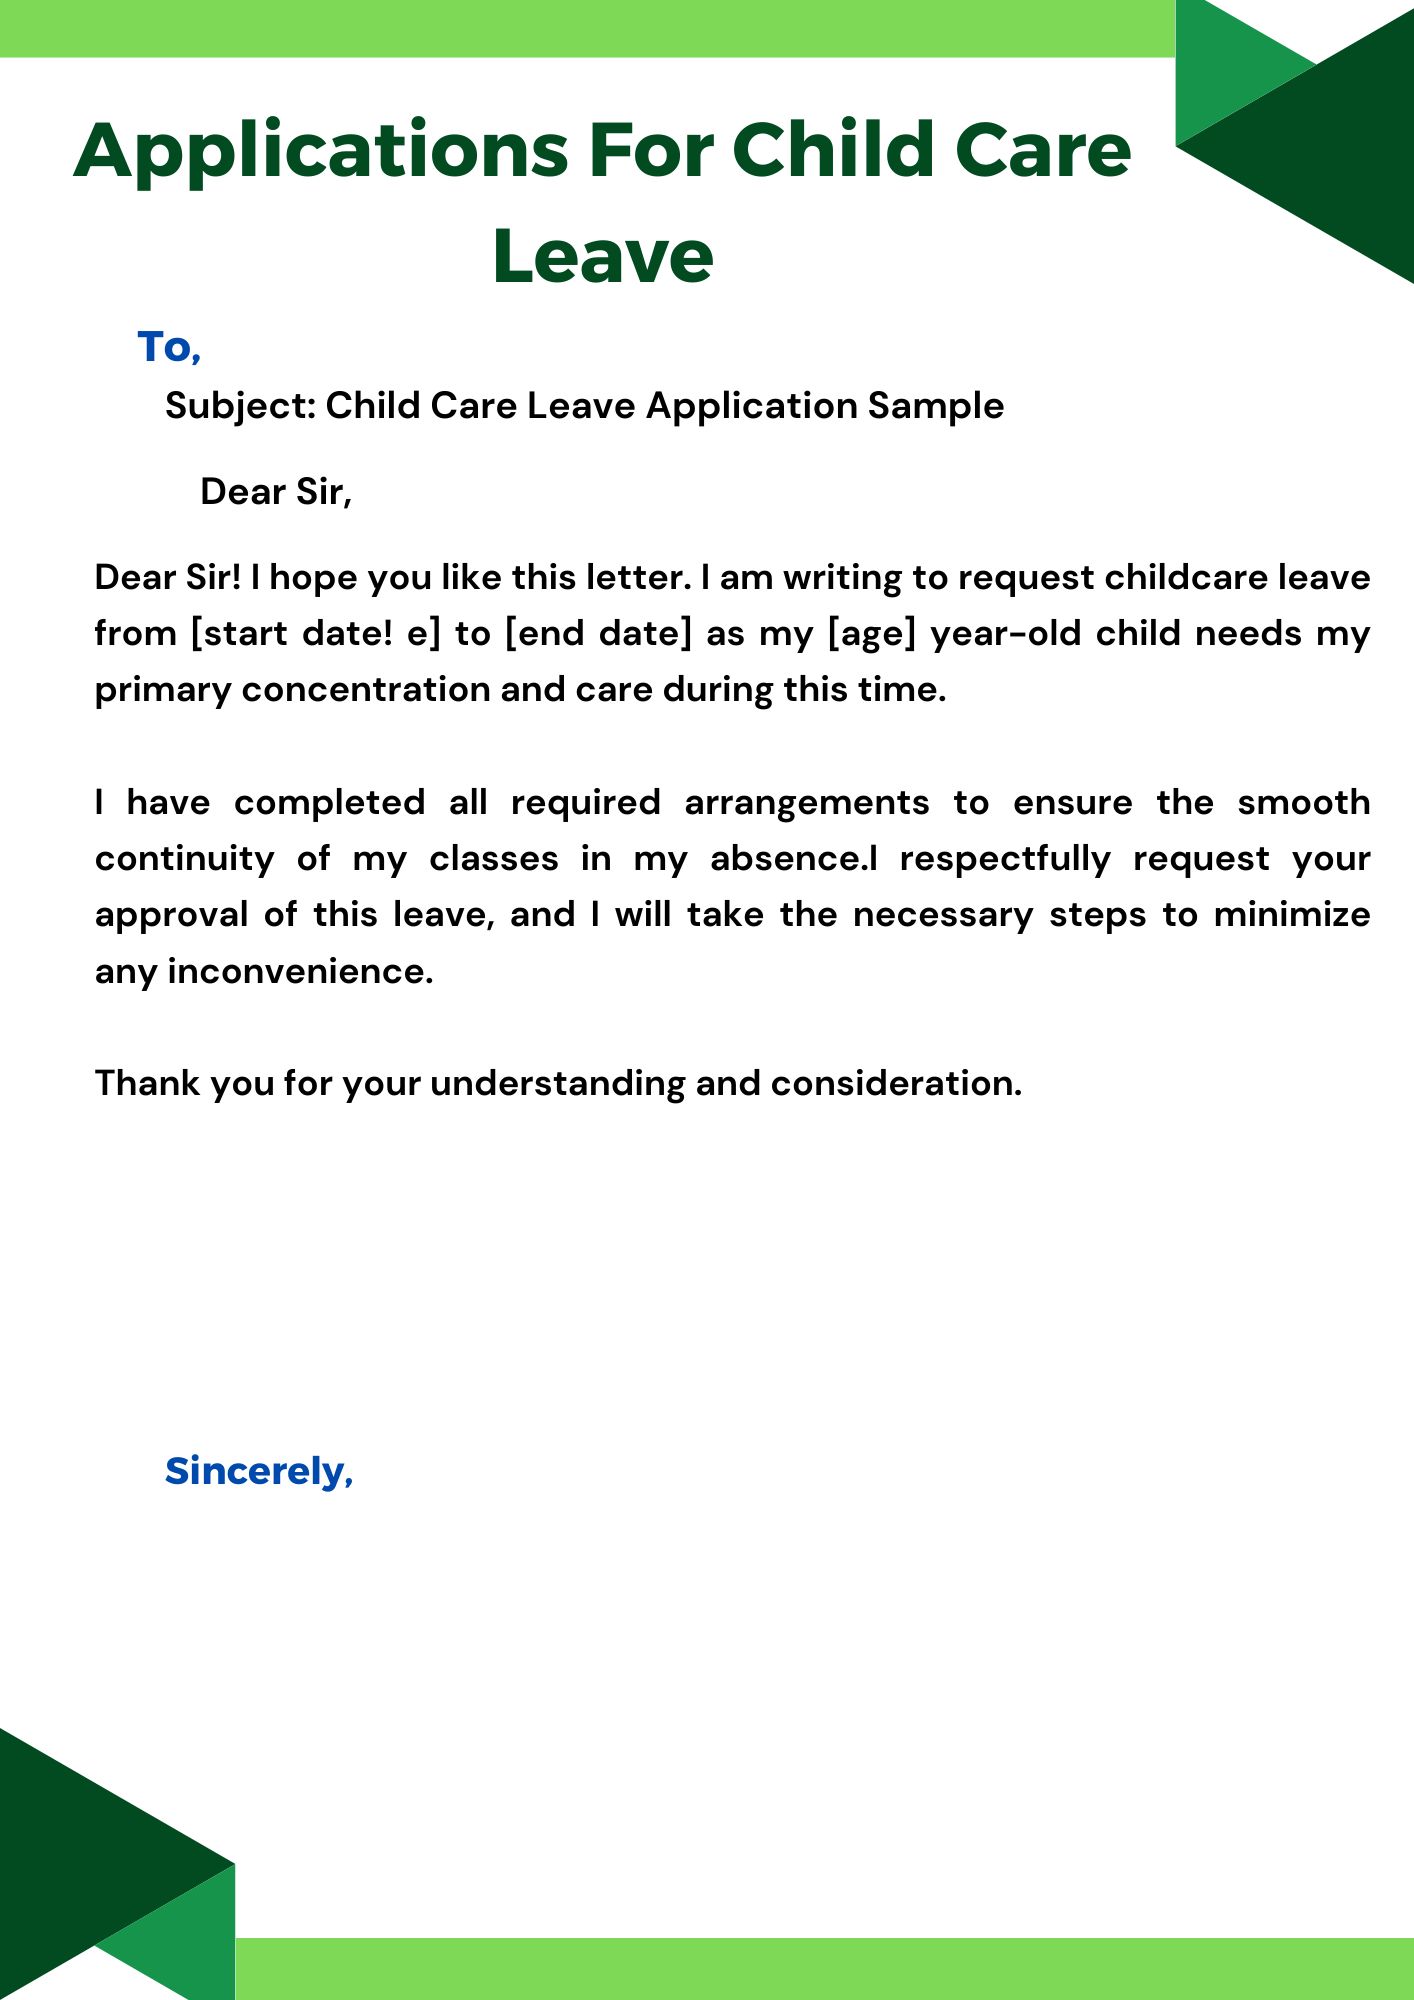 Application For Child Care Leave  (Sample-1)